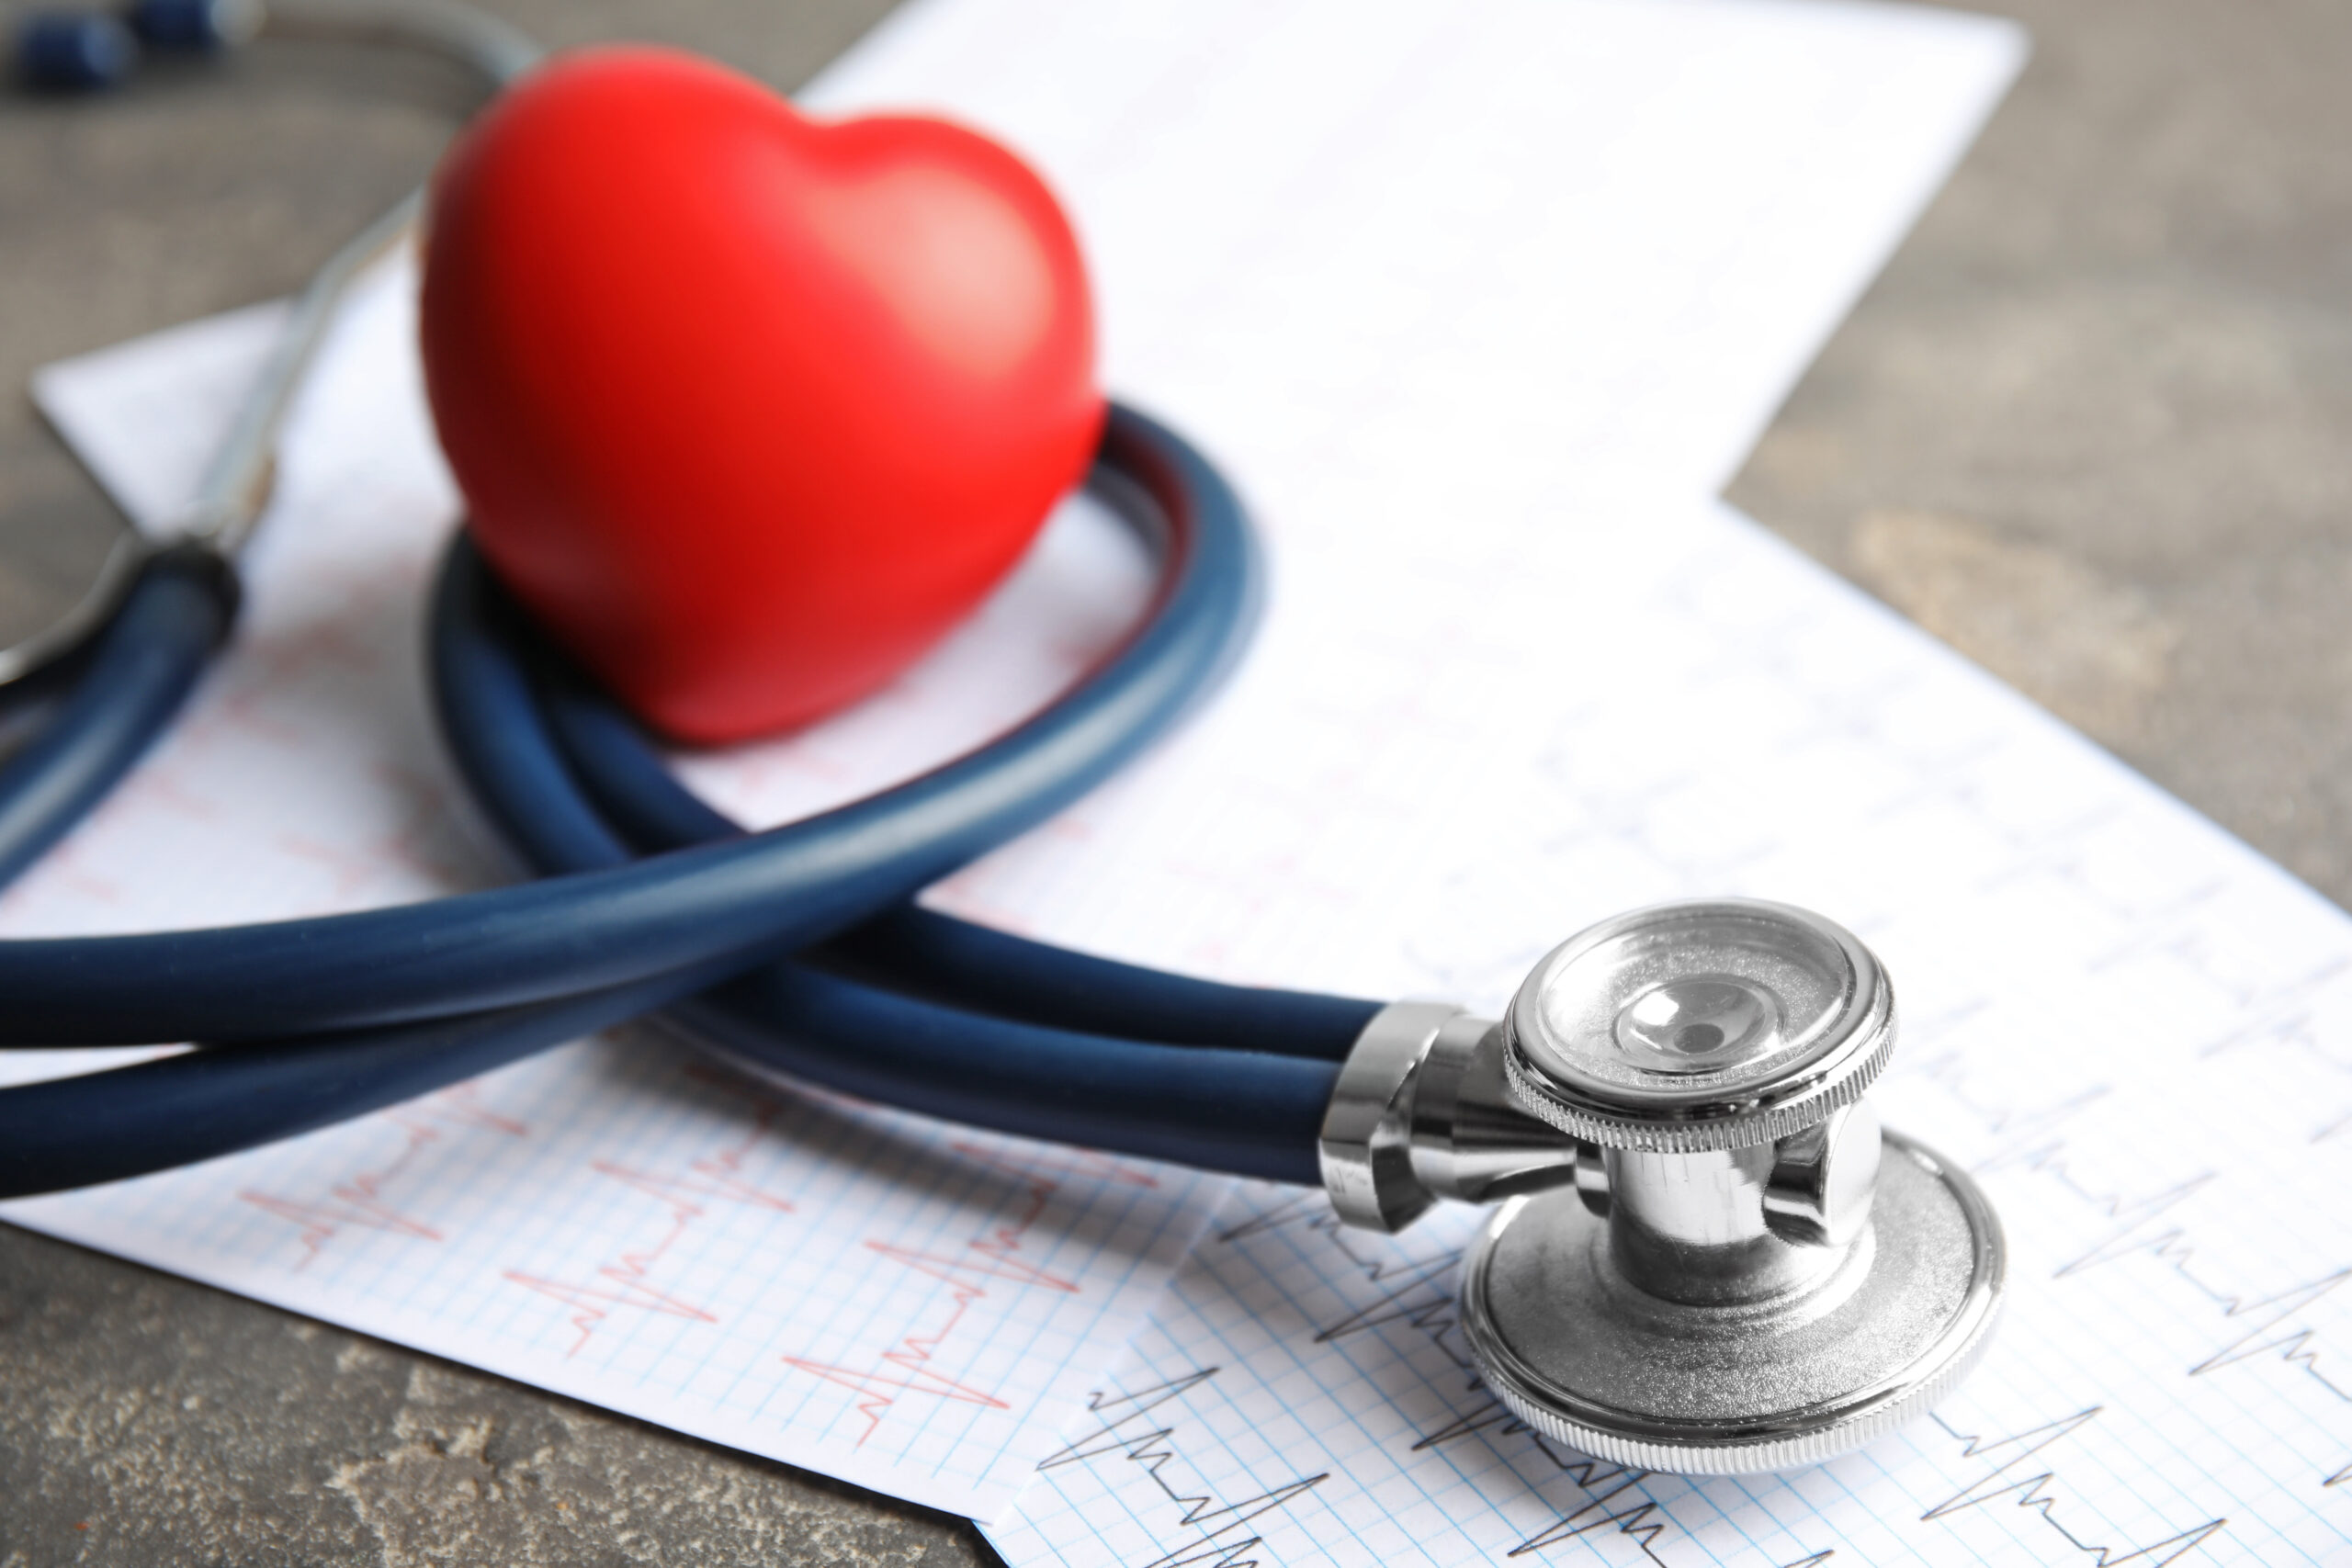 Stethoscope, red heart and cardiogram on gray table. Cardiology